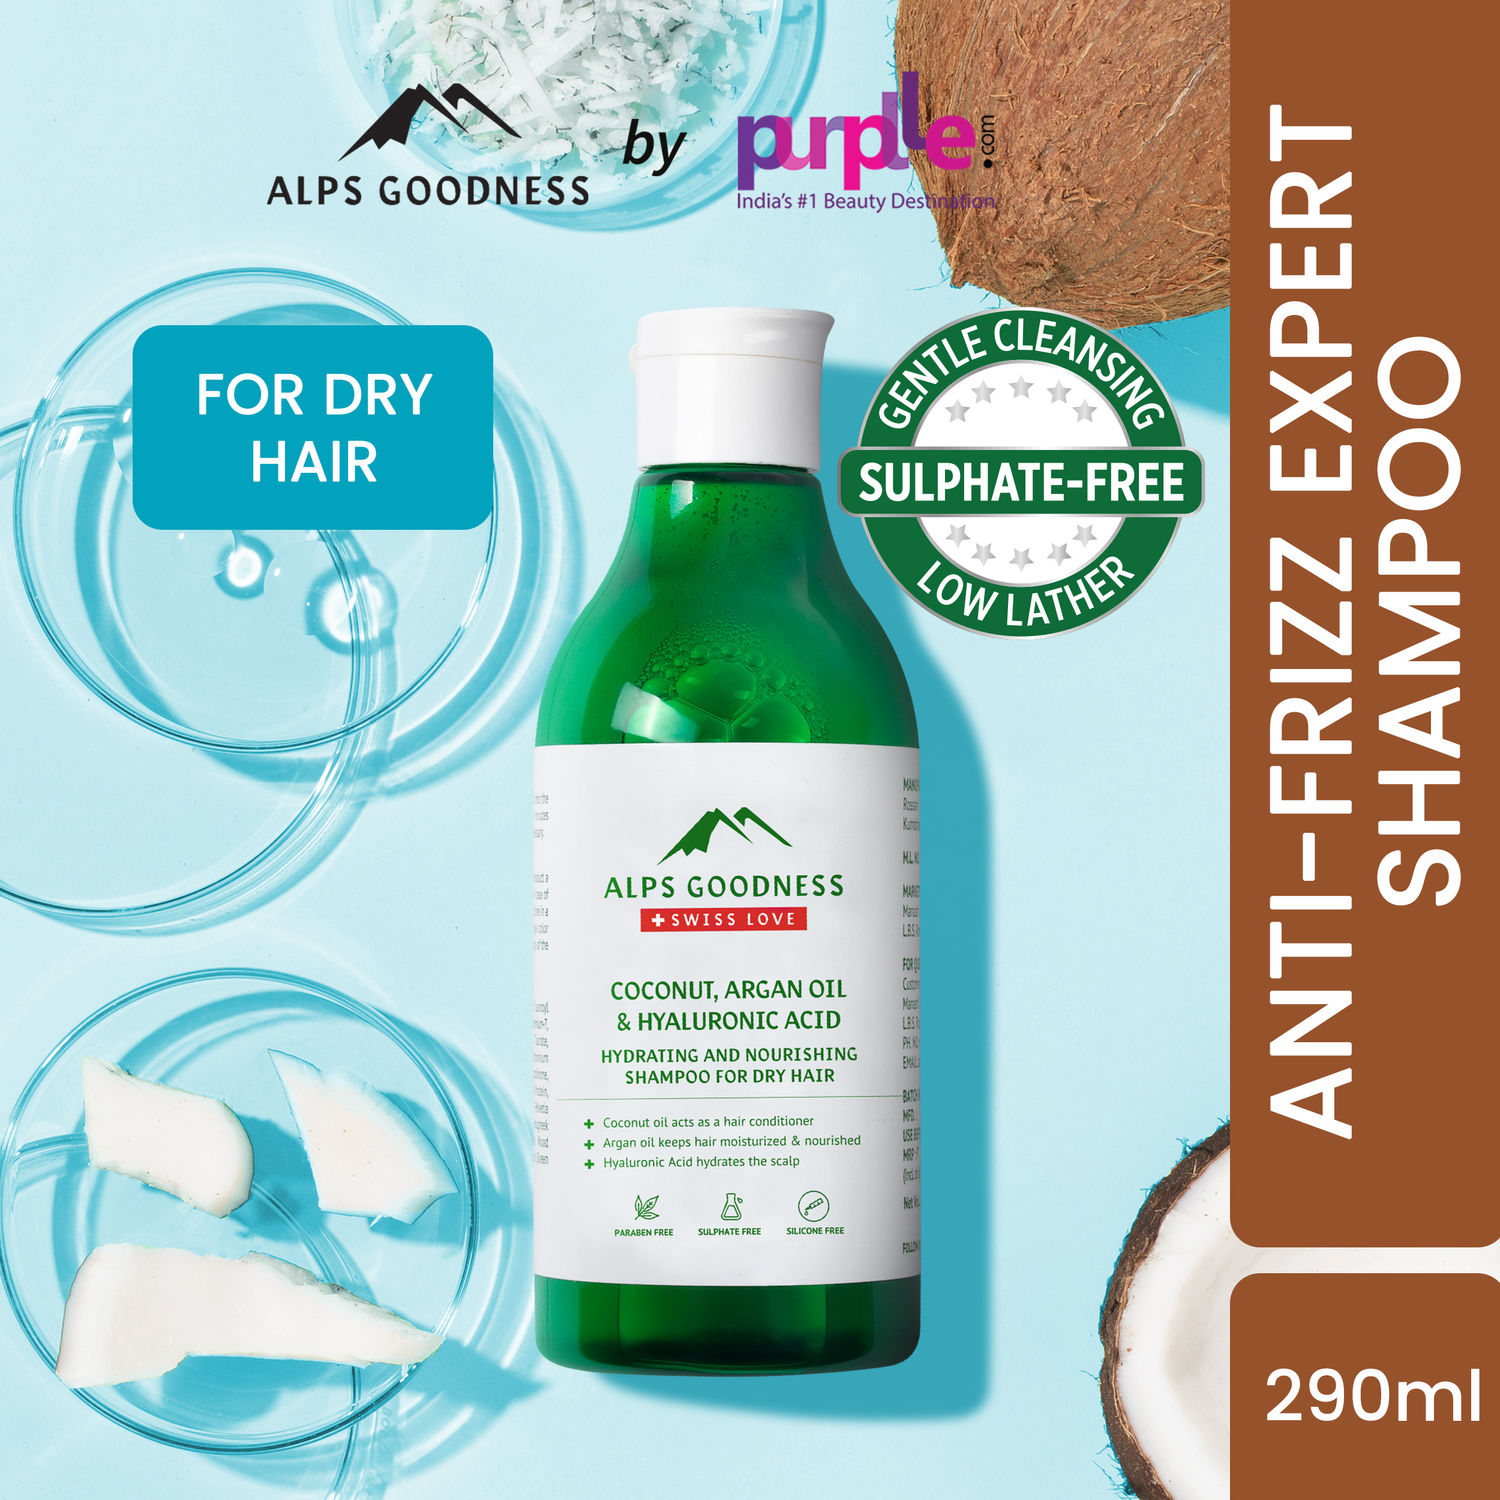 Alps Goodness Coconut, Argan Oil & Hyaluronic Acid Hydrating & Nourishing Shampoo for Dry Hair (290 ml) | Sulphate Free, Silicone Free, Paraben Free | Gentle & Mild Cleansing Shampoo| Vegan | Suitable for Dry & Frizzy Hair (290 ml)